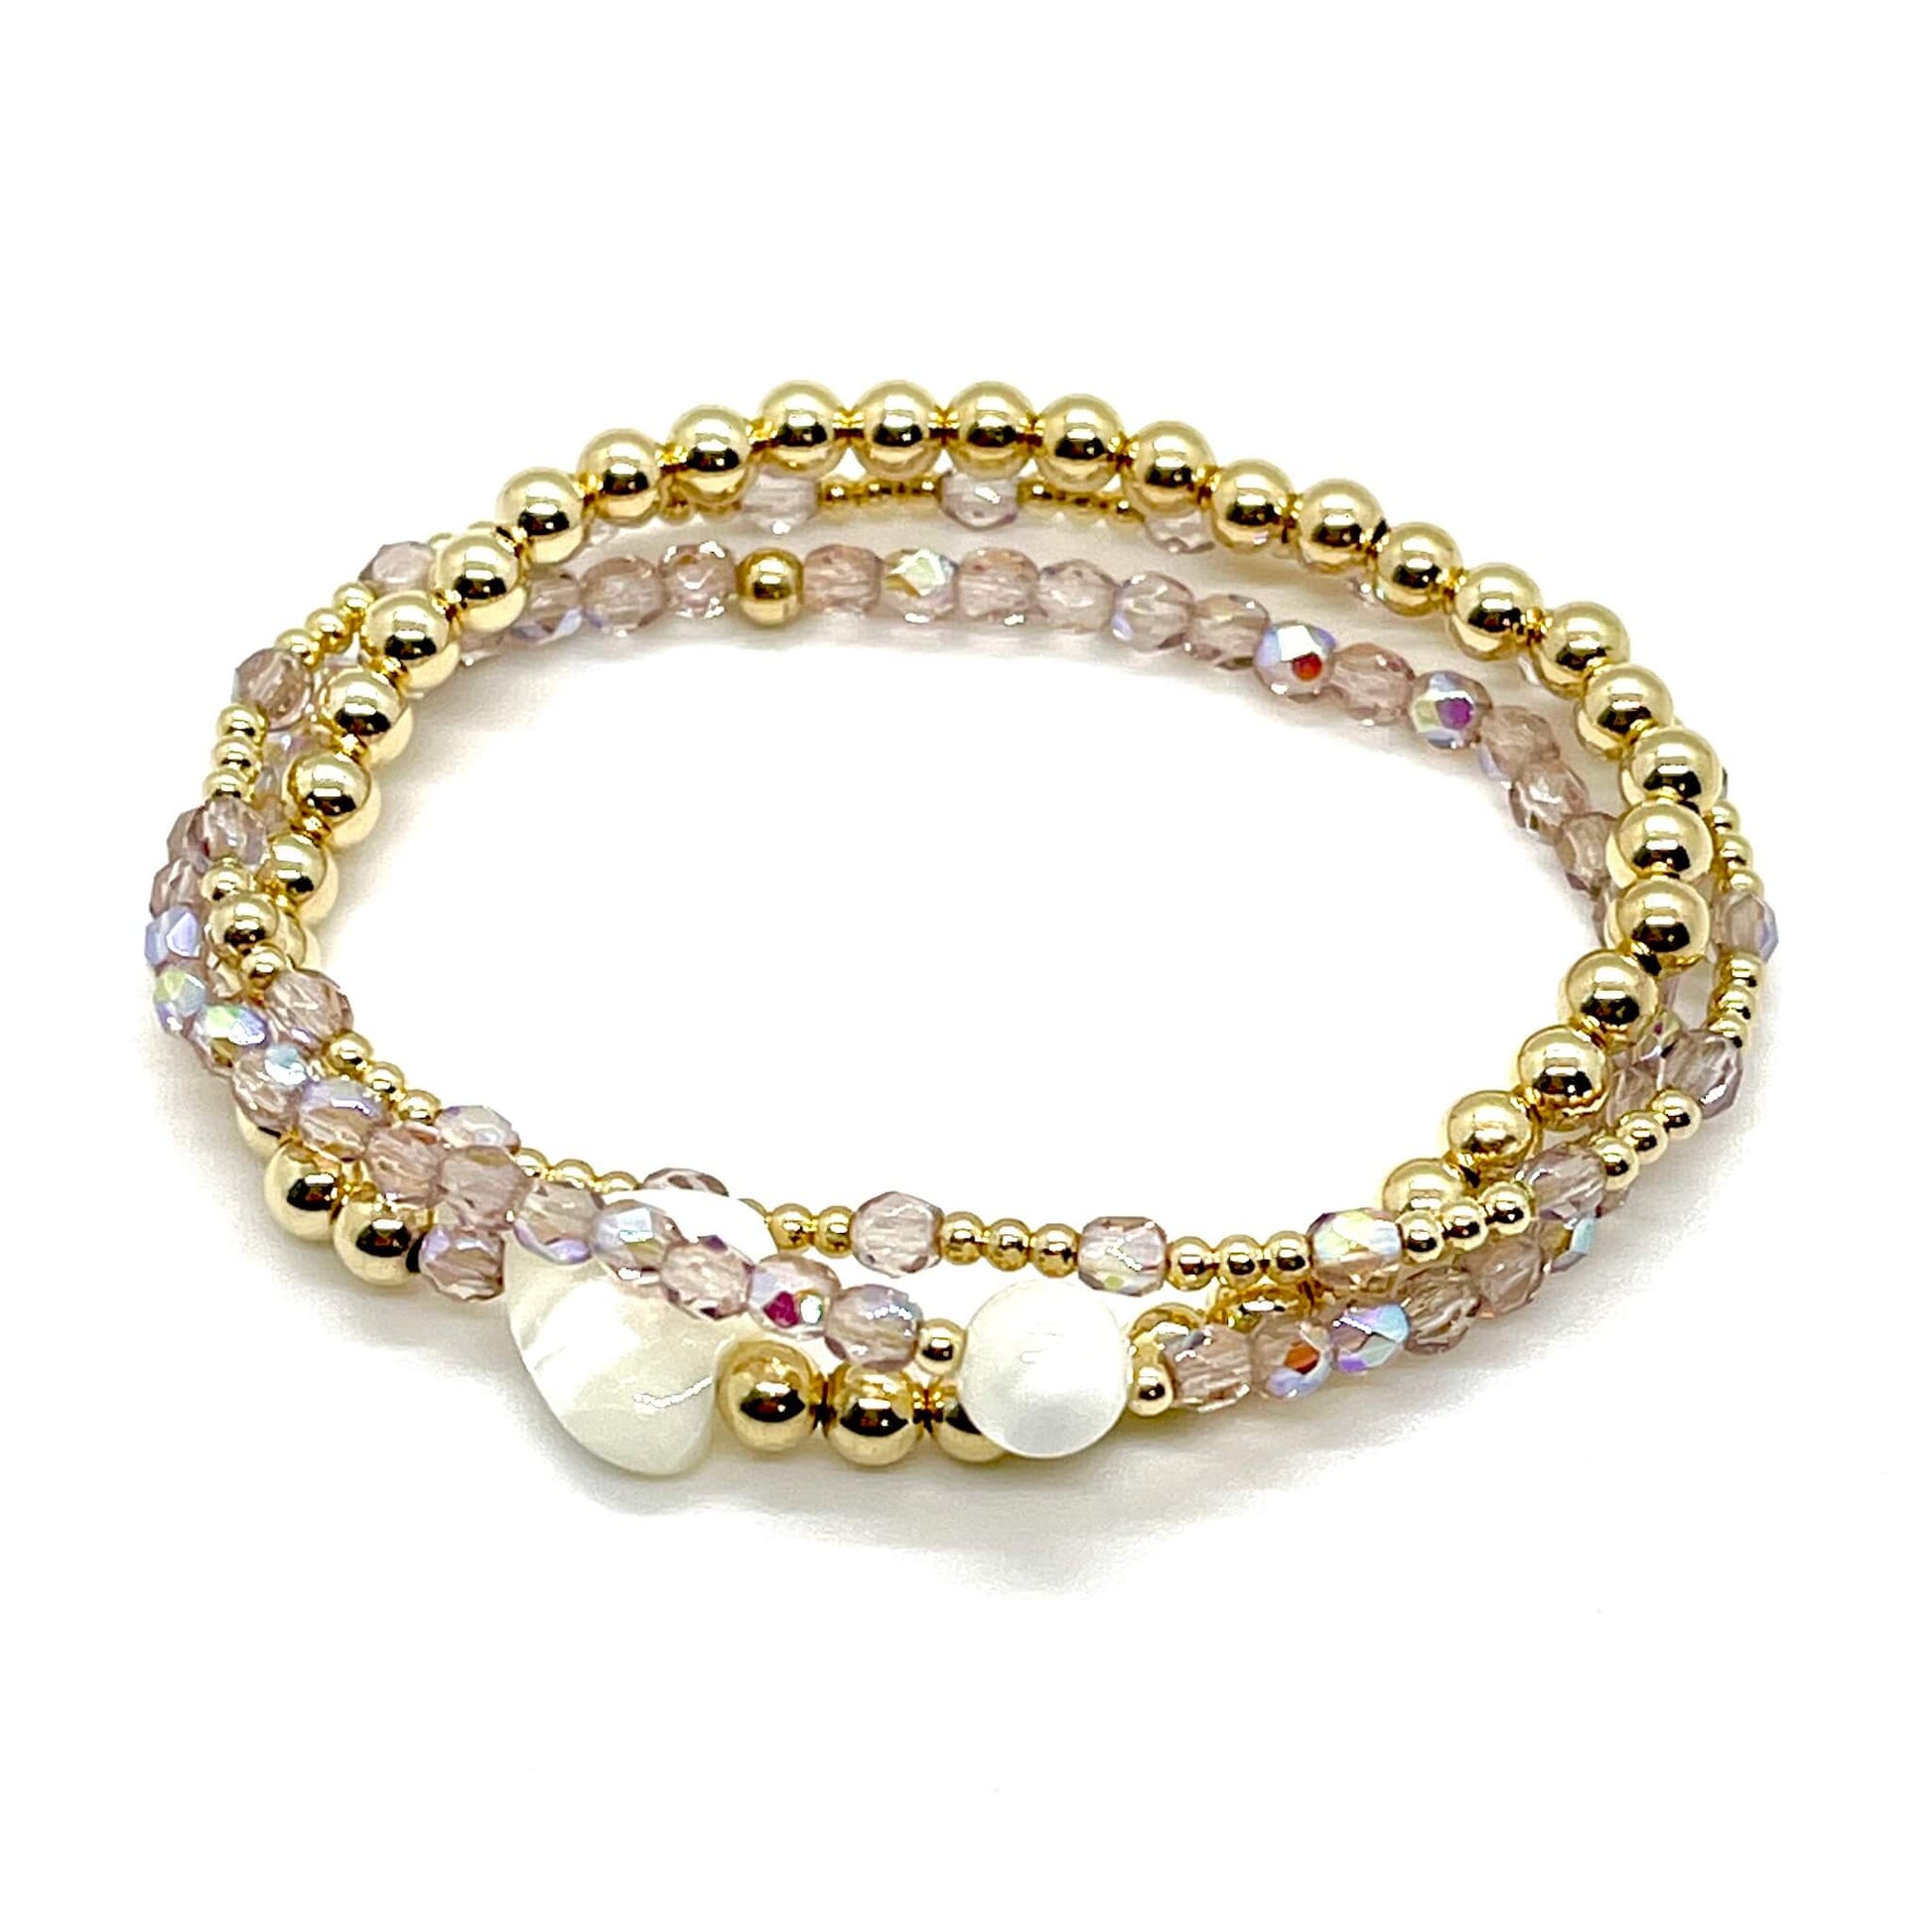 Light purple crystal and gold bracelet stack of 3. Womens handmade stretch bracelets wtih round and heart shaped mother-of-pearl accent beads.